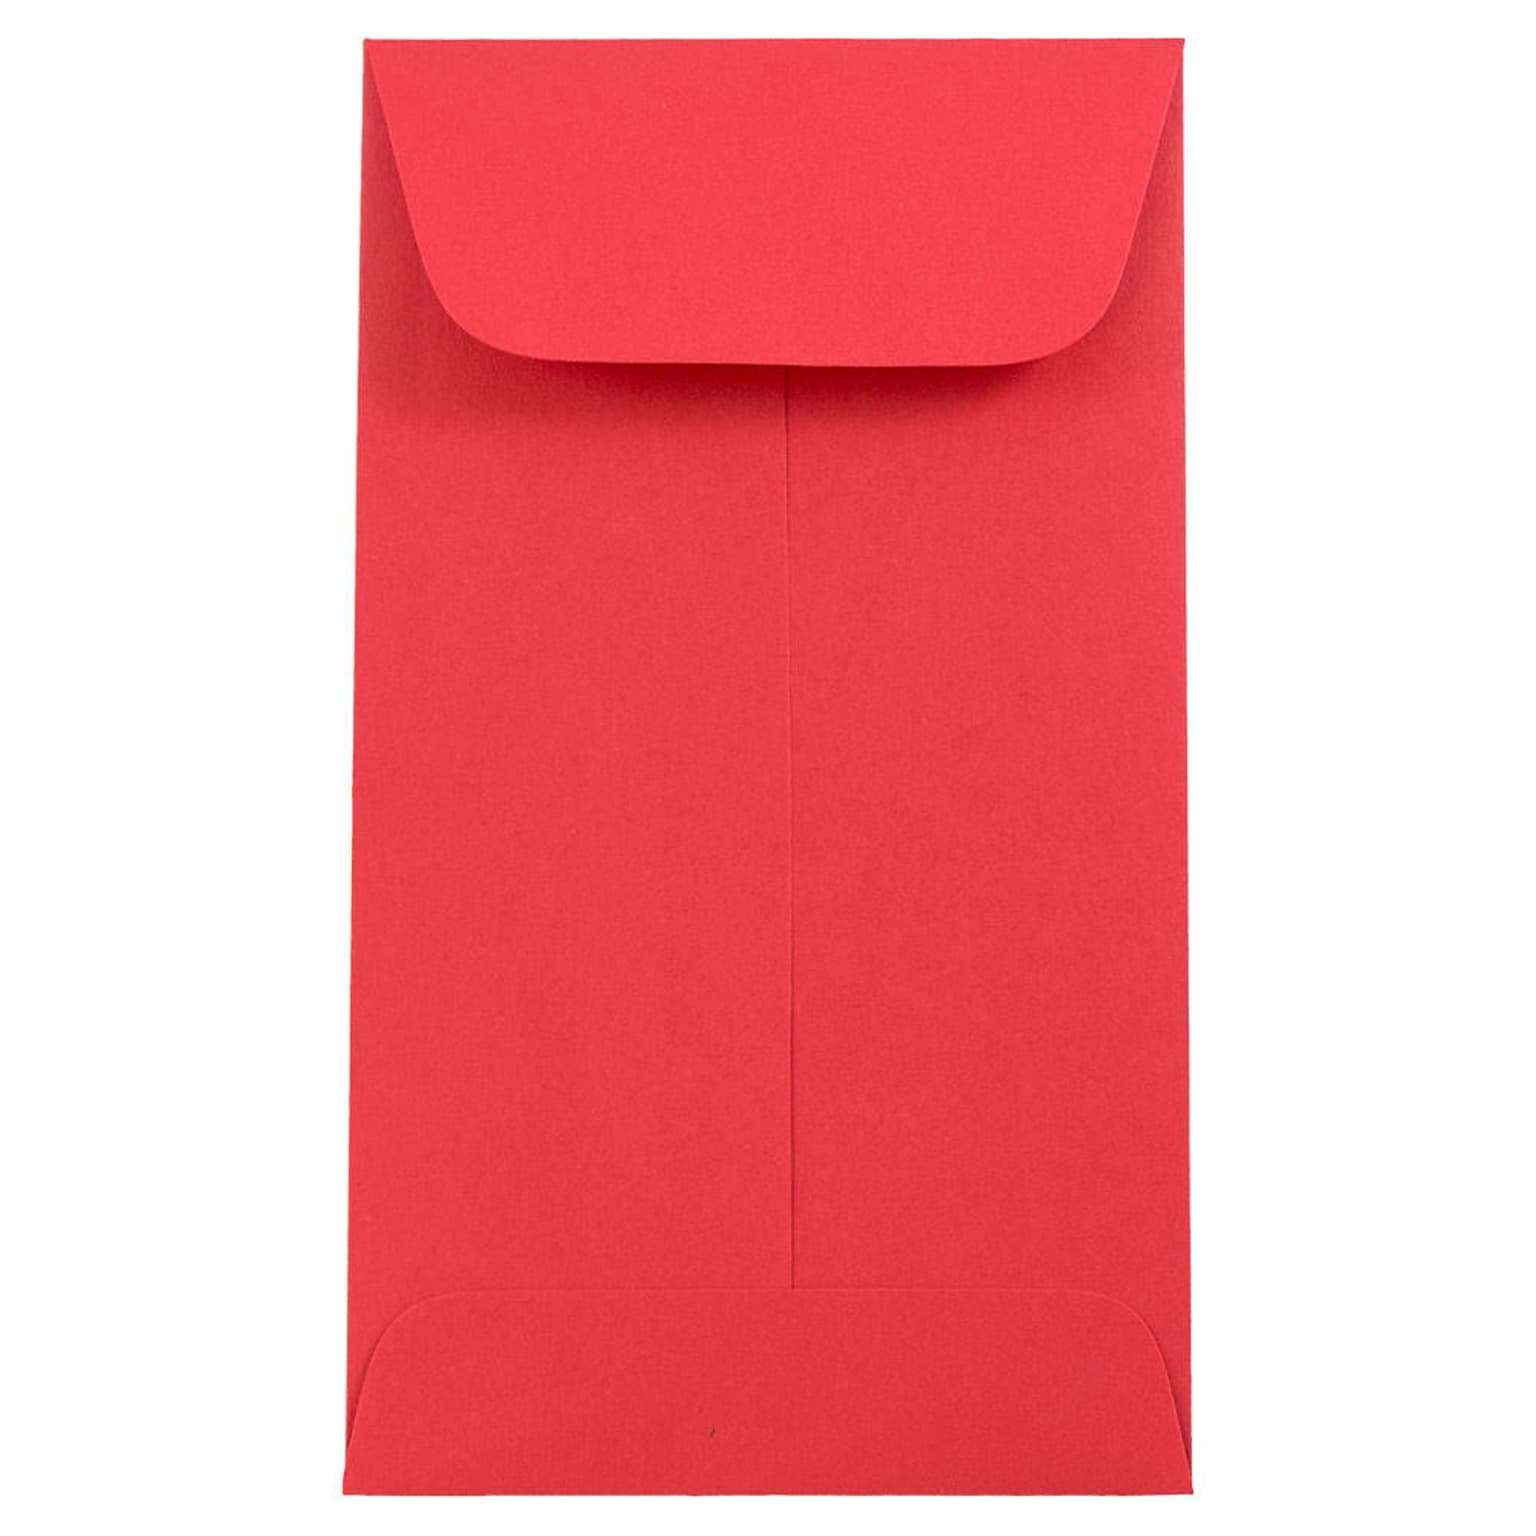 JAM Paper #5.5 Coin Business Colored Envelopes, 3.125 x 5.5, Red Recycled, 25/Pack (356730551)